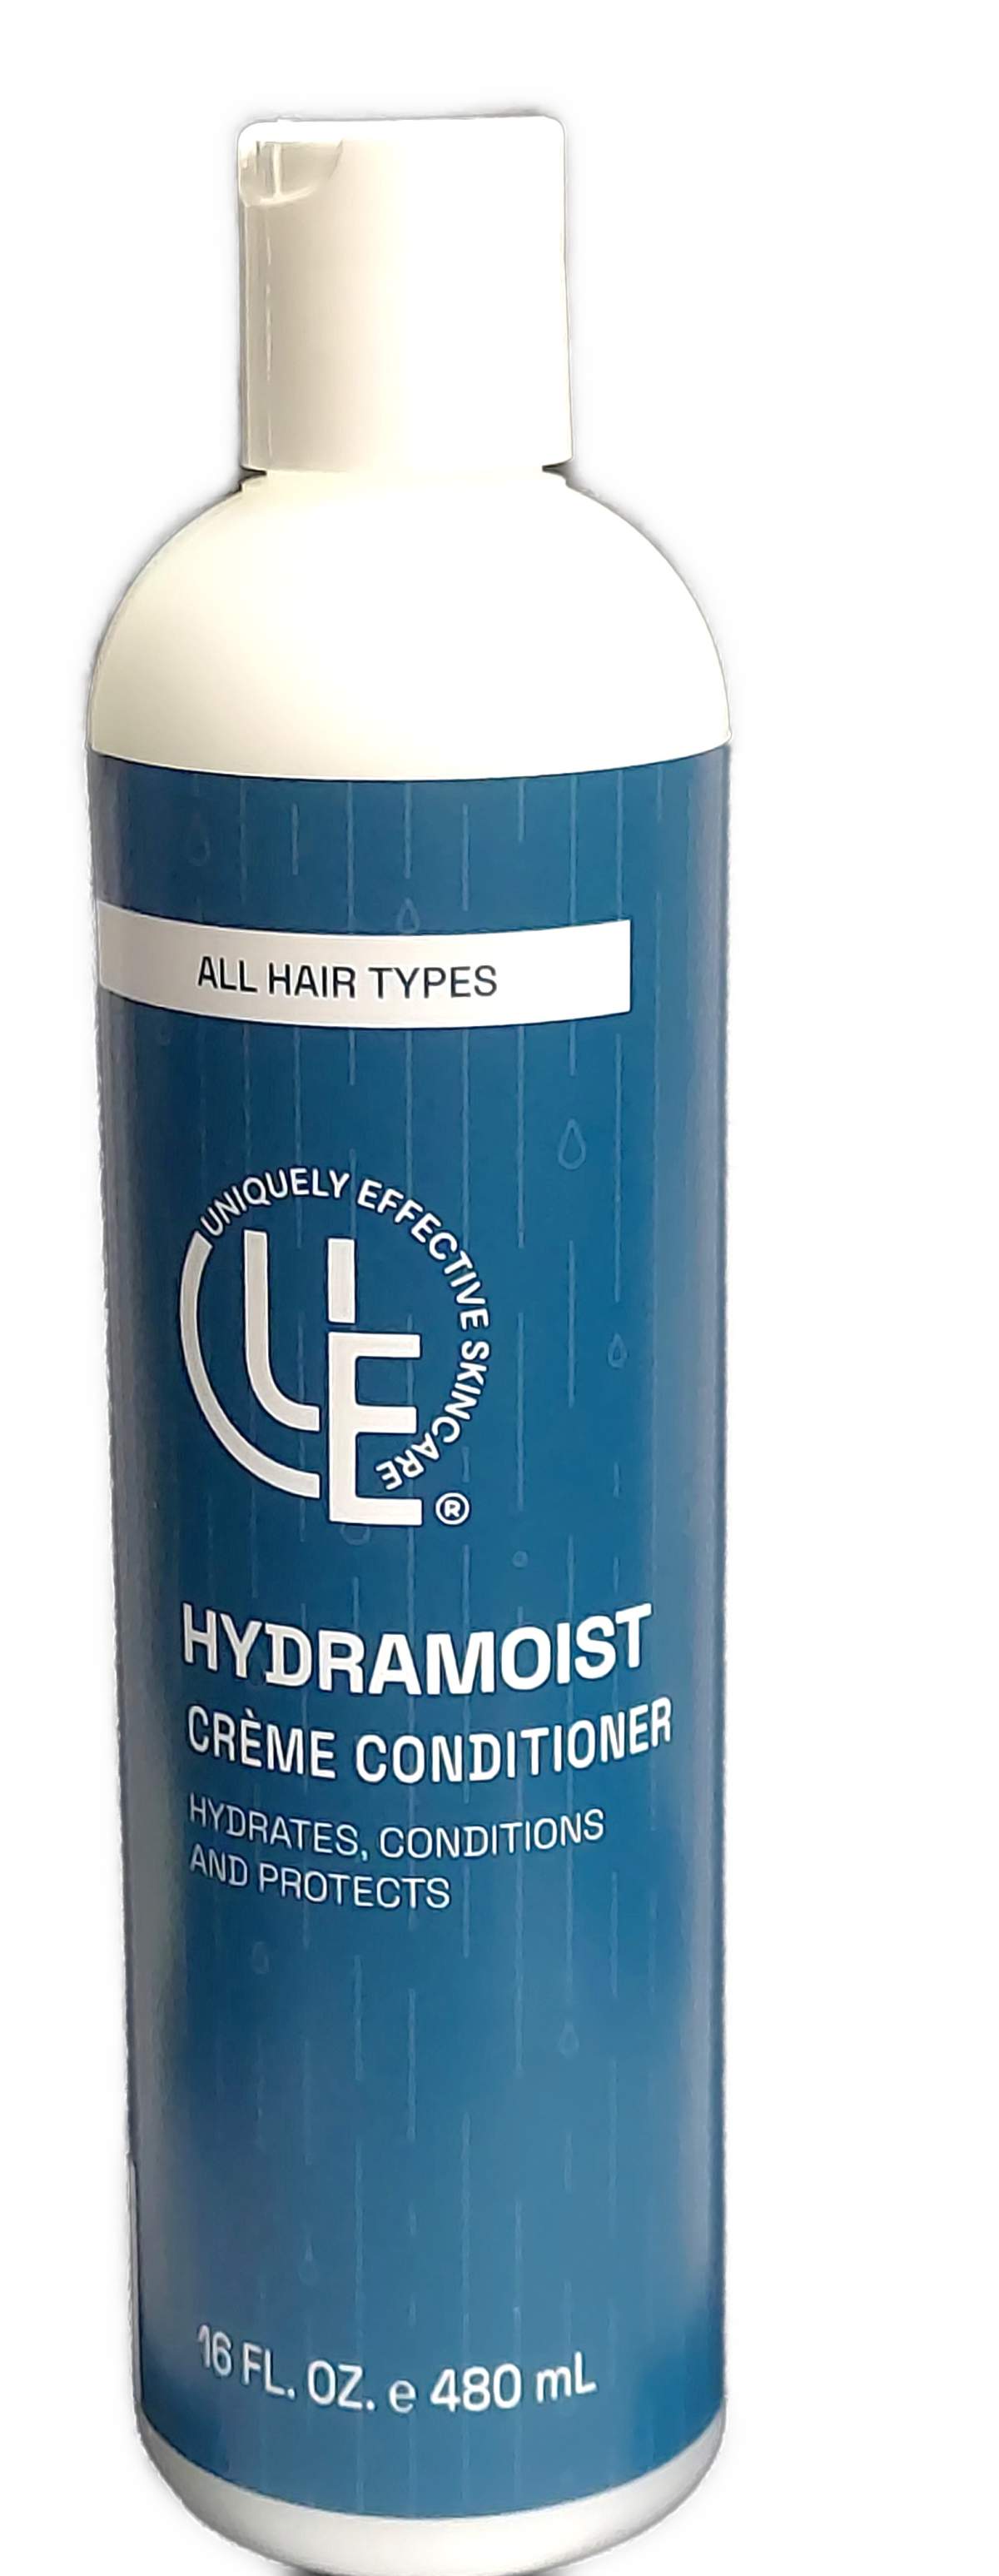 HYDRAMOIST CREME CONDITIONER:  Hydrates and Protects (16 fl. oz. bottle)